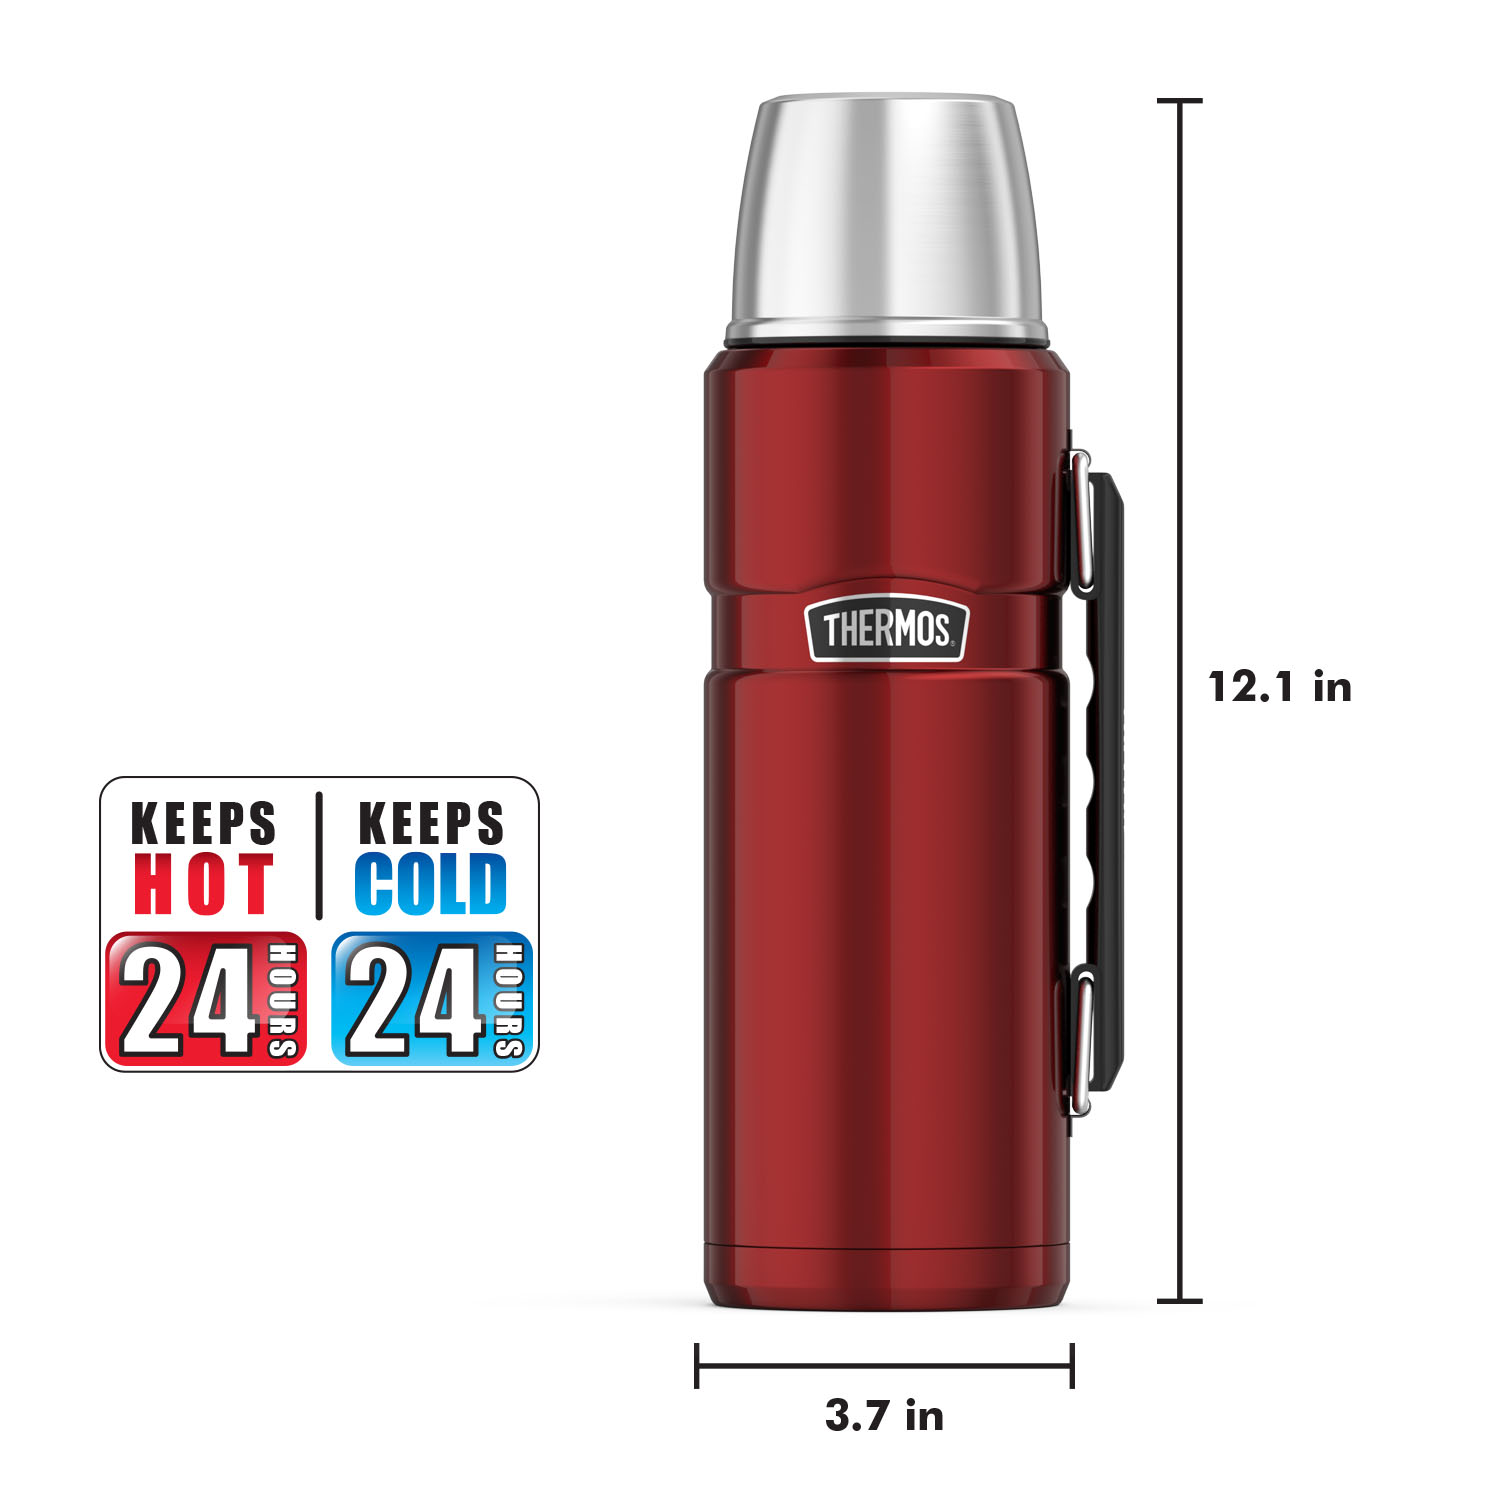 Thermos SK2010CRTRI4 Stainless King Bottle, 1.2L (Cranberry Red) - image 5 of 5